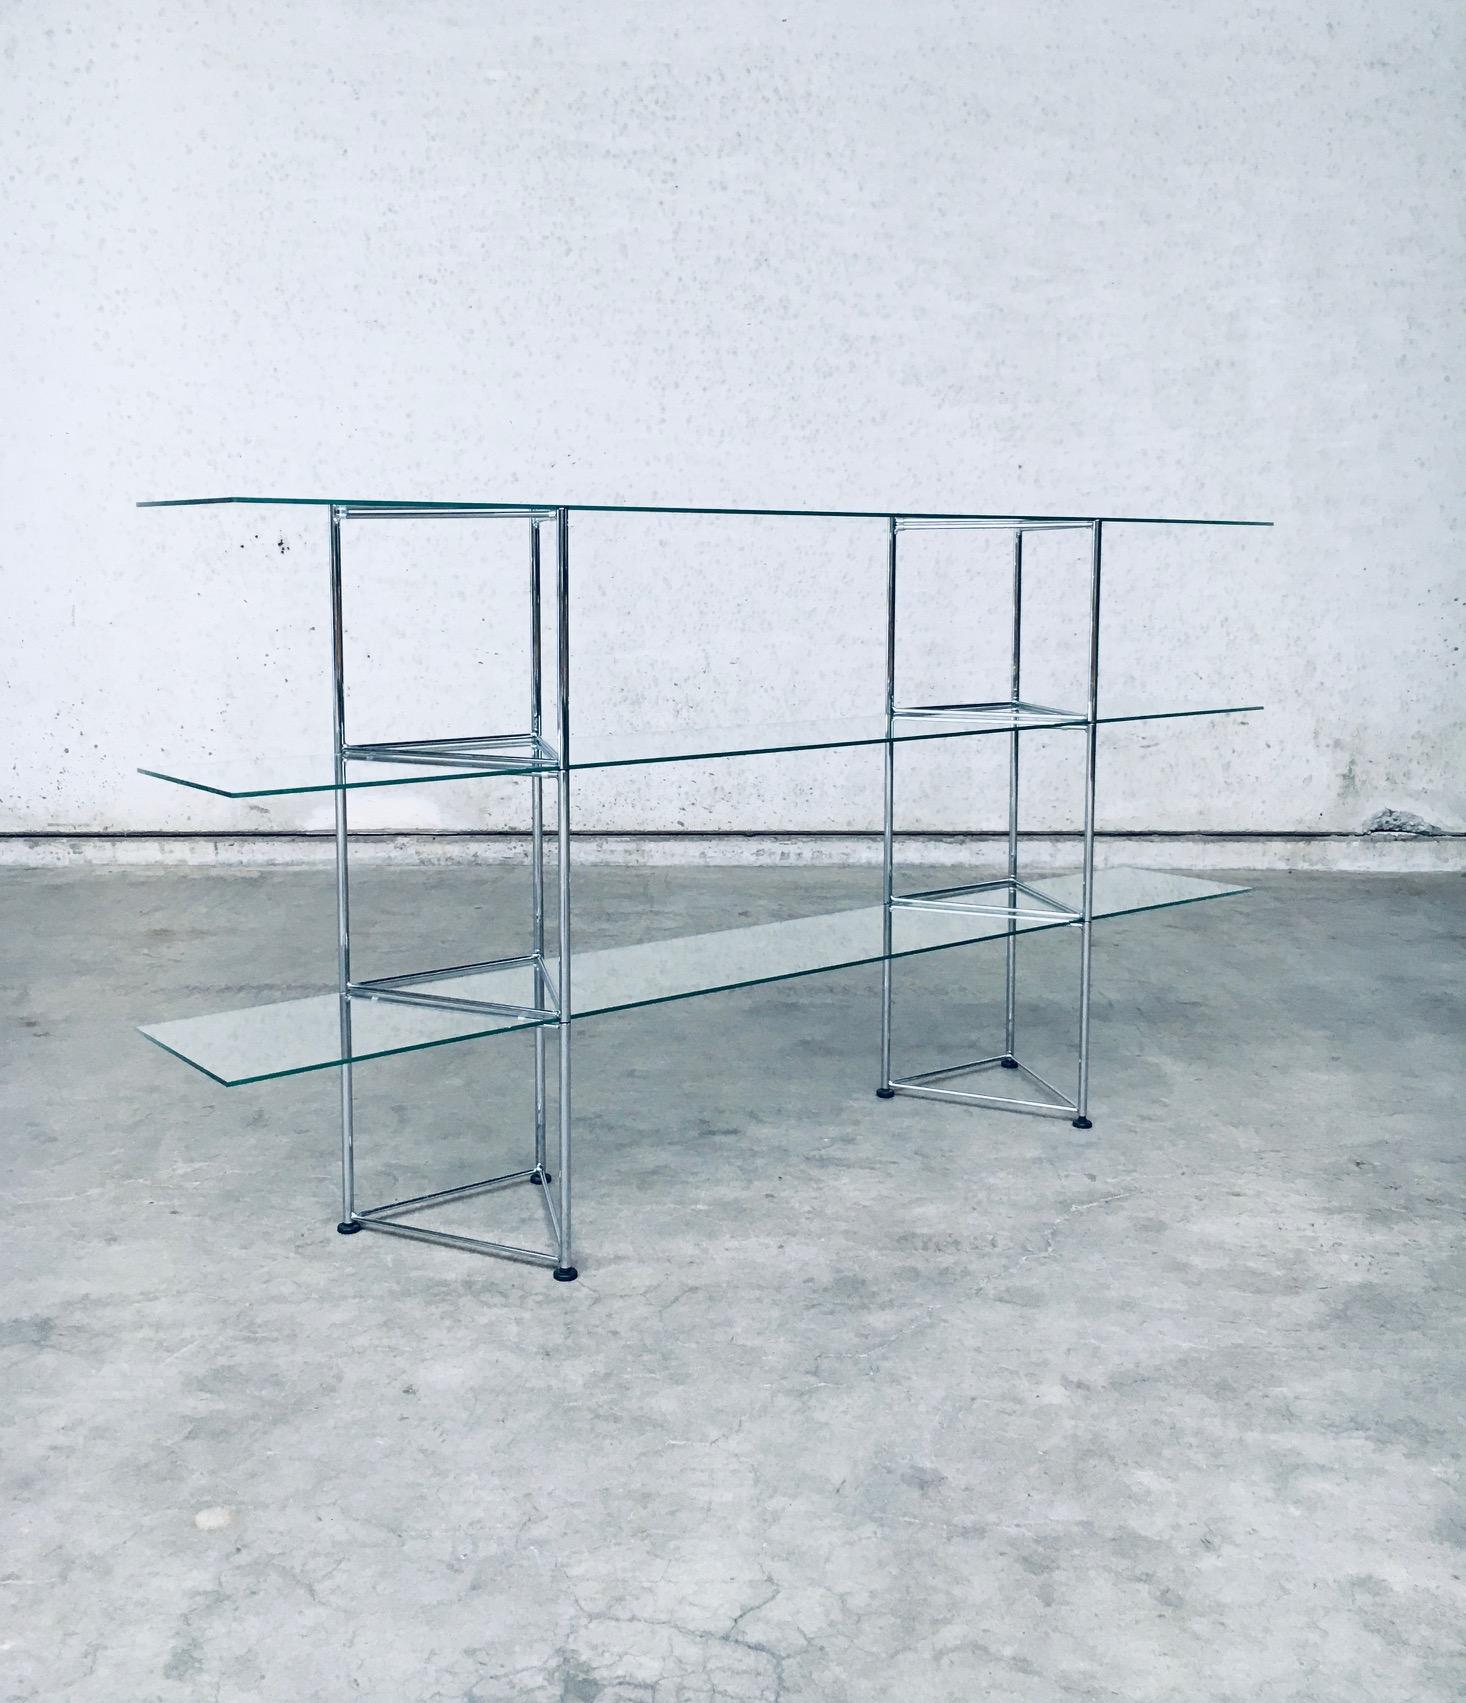 Vintage Postmodern Design Slender Glass & Metal Wall Rack / Display Shelves. Made in Italy, 1980's. Three long glass shelves with triangular shaped metal constructed supports. Airy and light in design, typical for this period. This comes in very